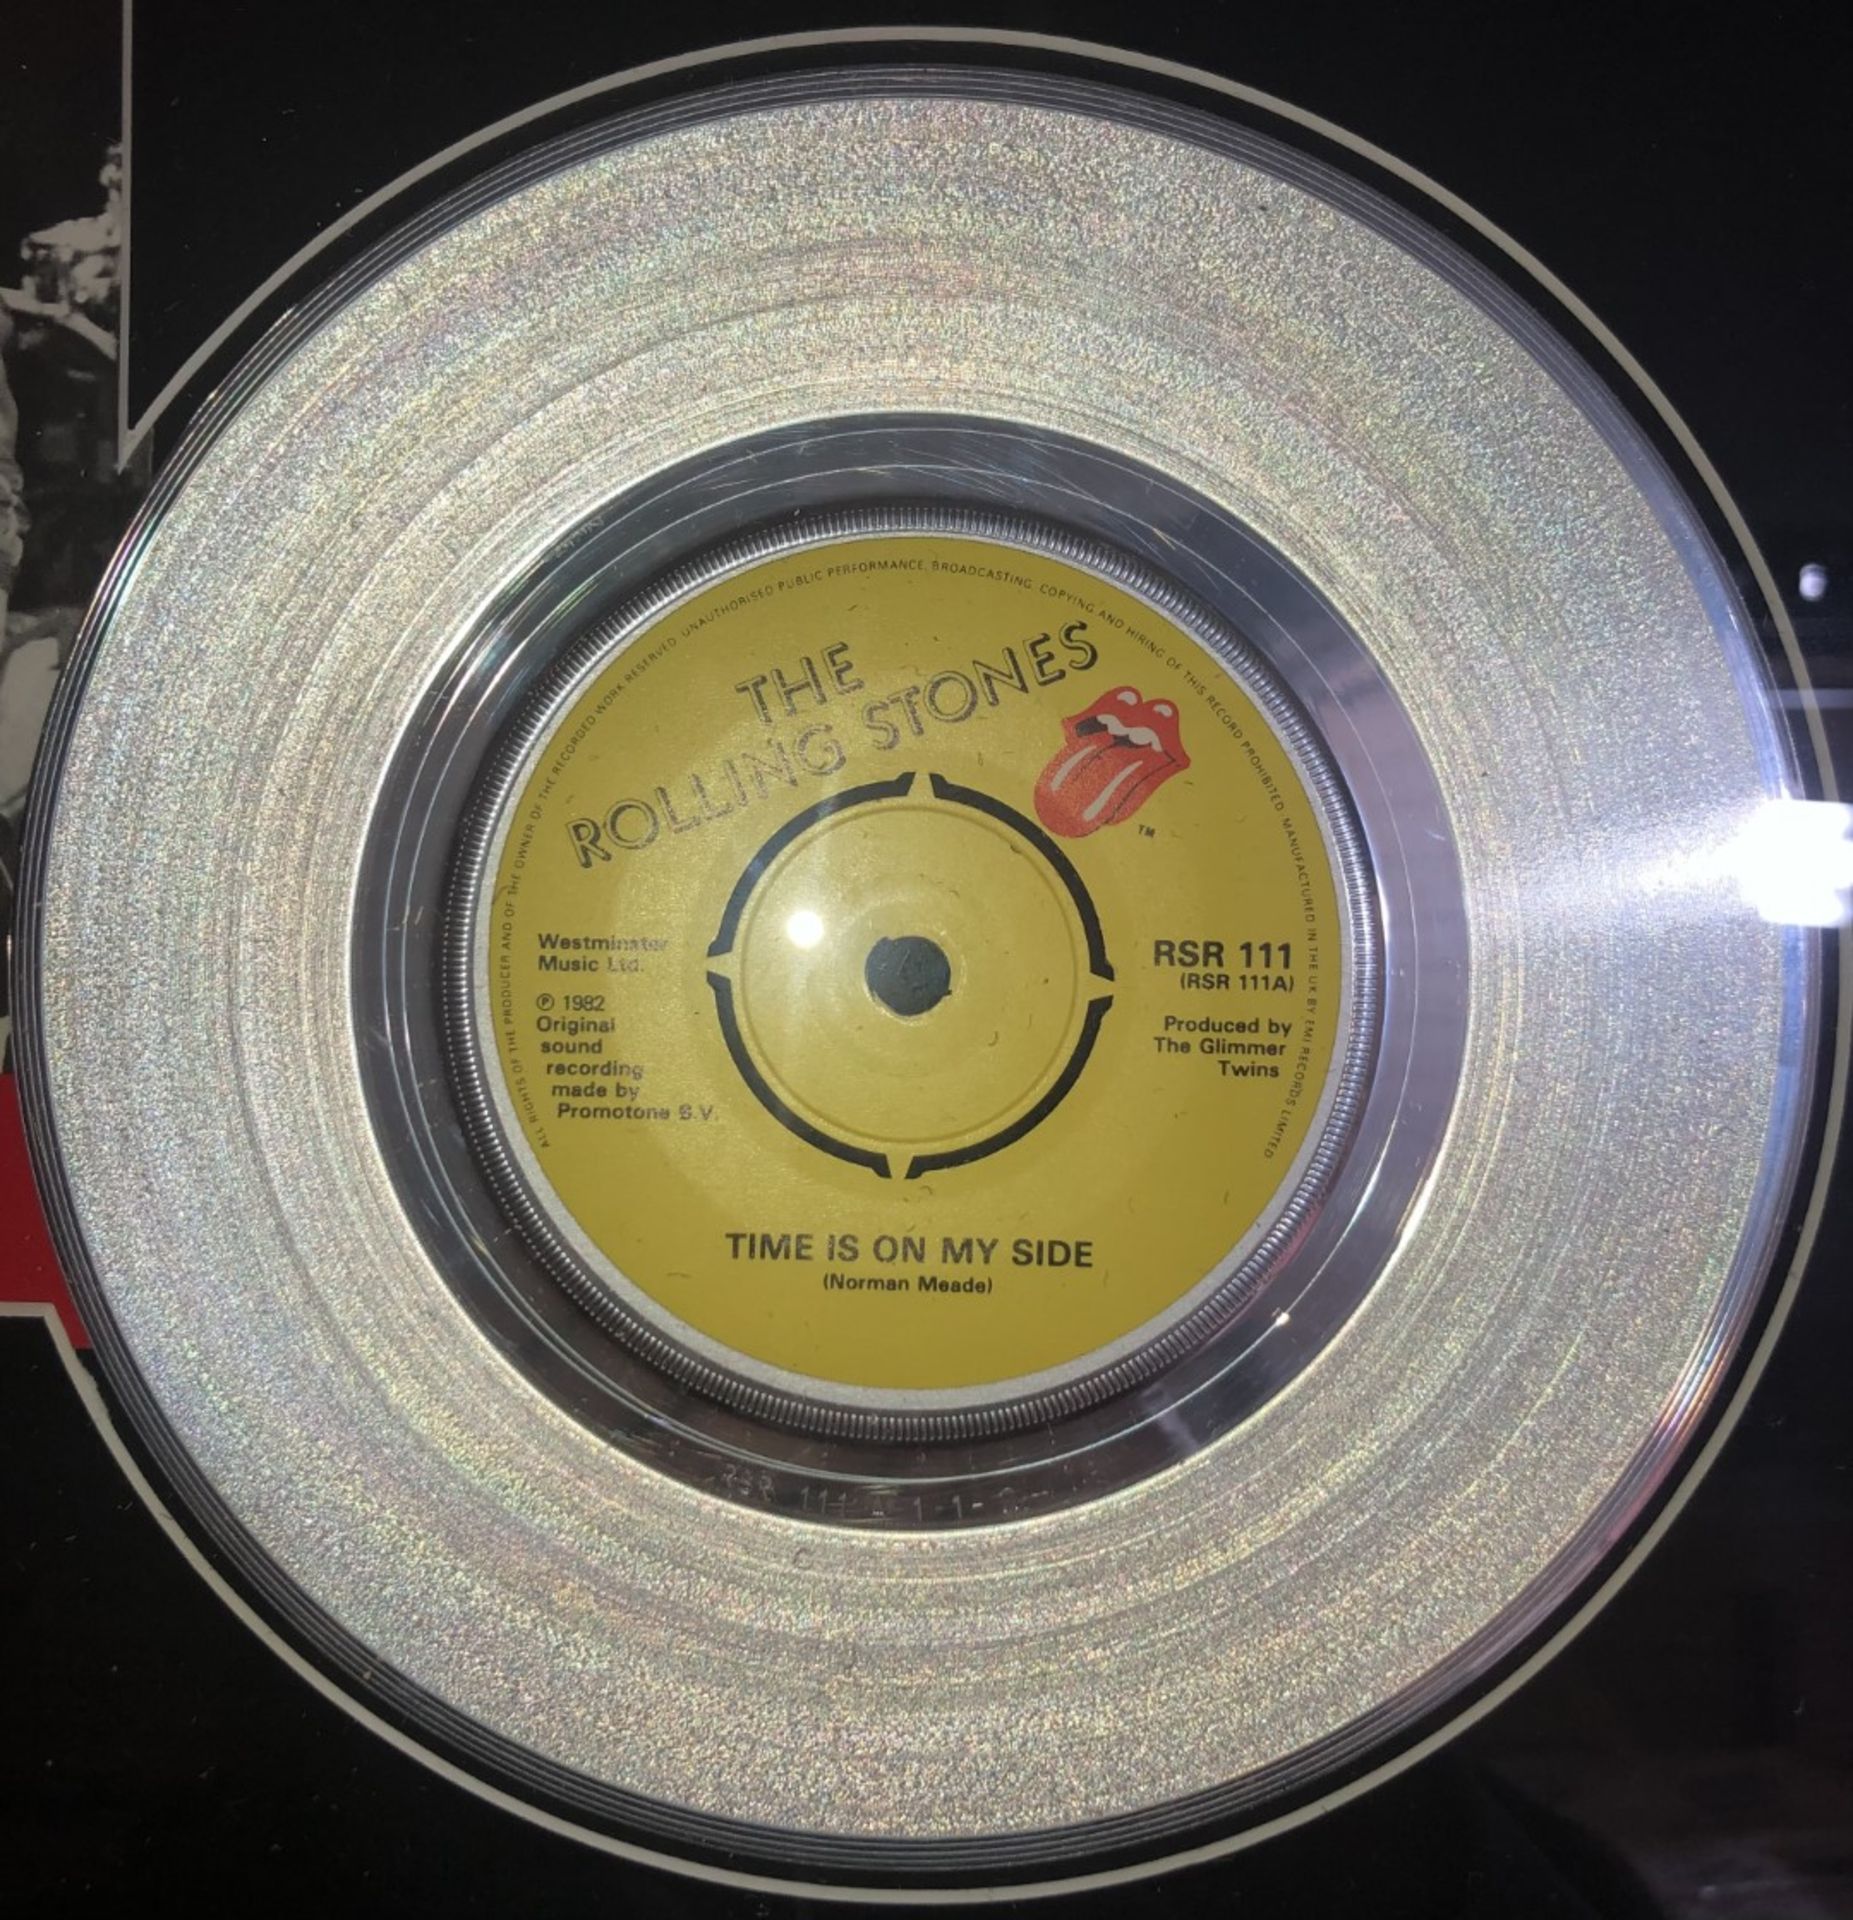 1 x Framed ROLLING STONES Silver 7 Inch Vinyl Record - TIME IS ON MY SIDE - Image 4 of 5